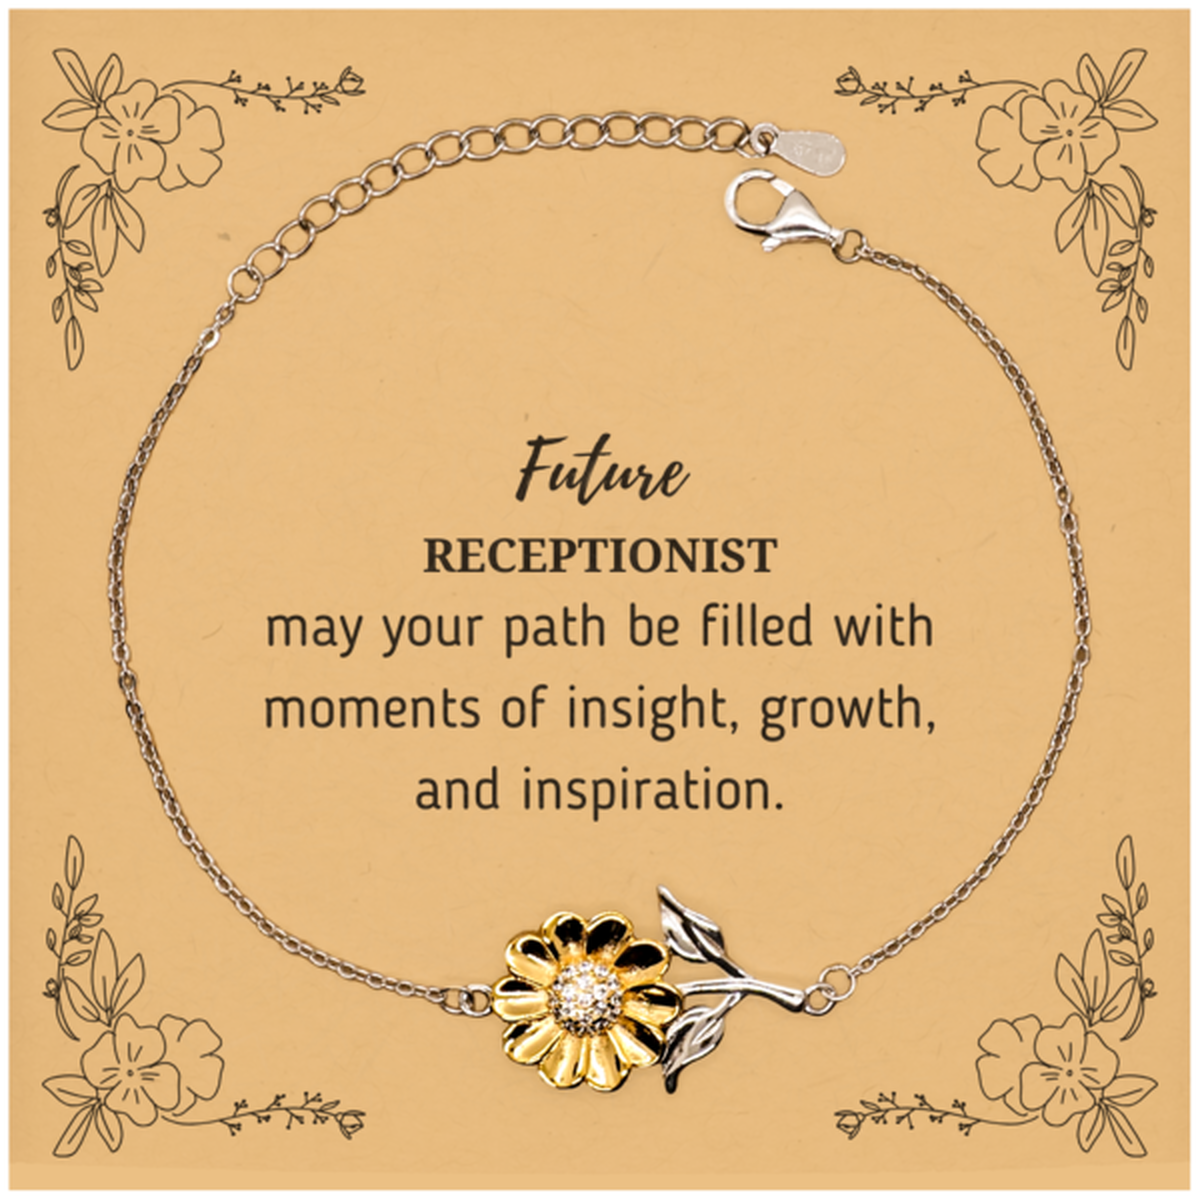 Future Receptionist Gifts, May your path be filled with moments of insight, Graduation Gifts for New Receptionist, Christmas Unique Sunflower Bracelet For Men, Women, Friends